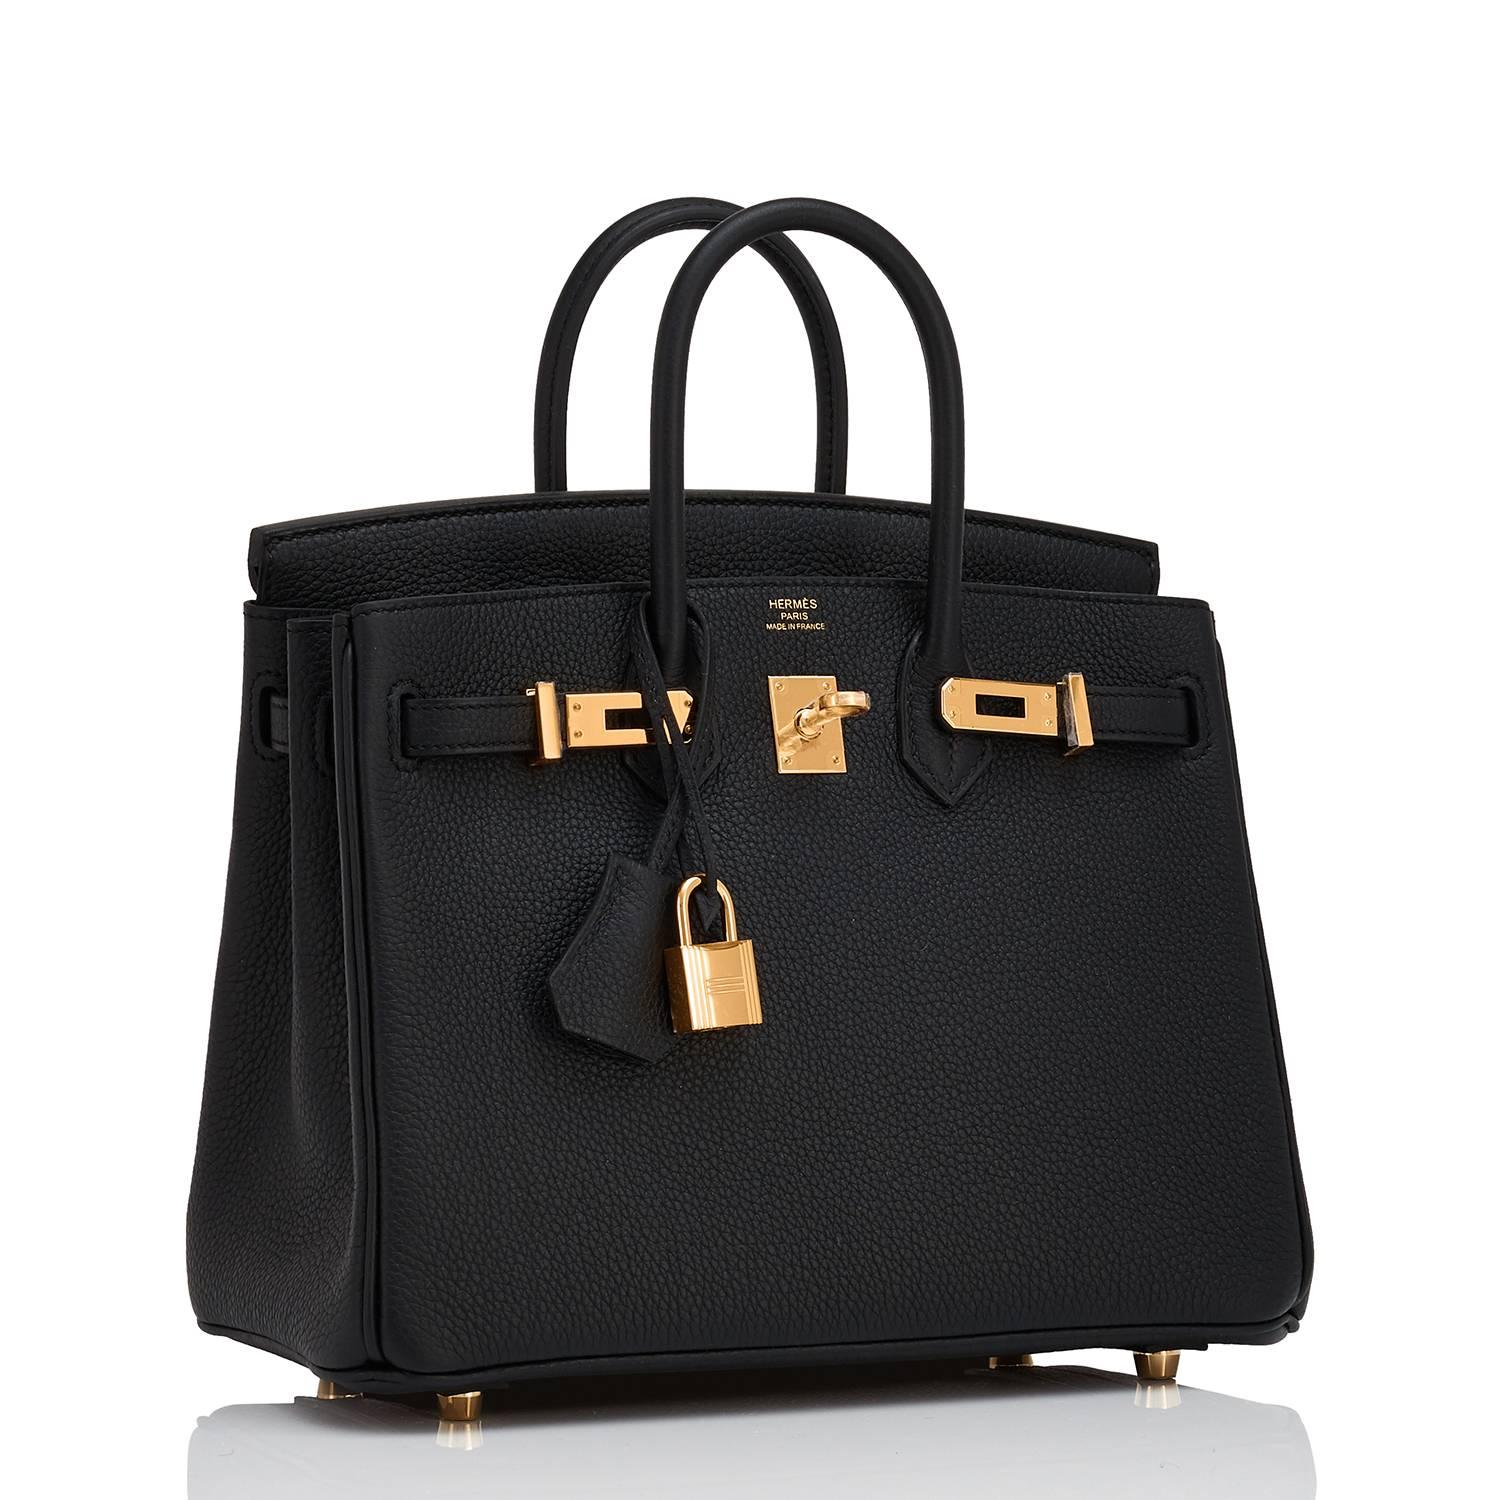 Hermes Black Baby Birkin 25cm Togo Gold Hardware Jewel
Brand New in Box.  Store Fresh. Pristine Condition (with plastic on hardware) 
Perfect gift! Comes full set with keys, lock, clochette, a sleeper for the bag, rain protector, and Hermes box.
As